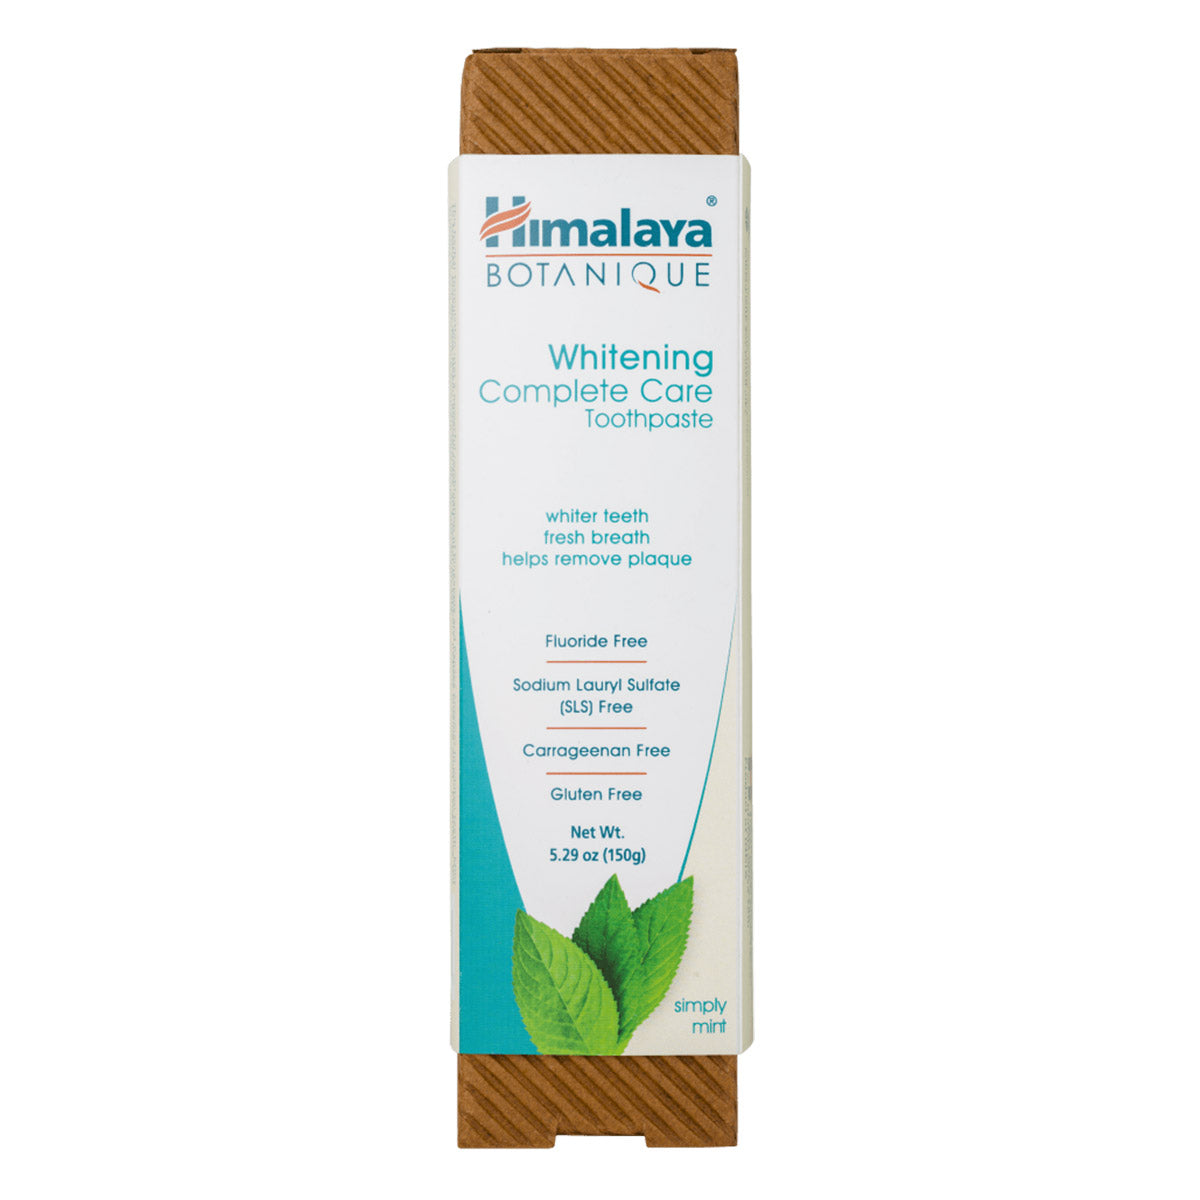 Alternate image of Complete Care Whitening Simply Mint Toothpaste